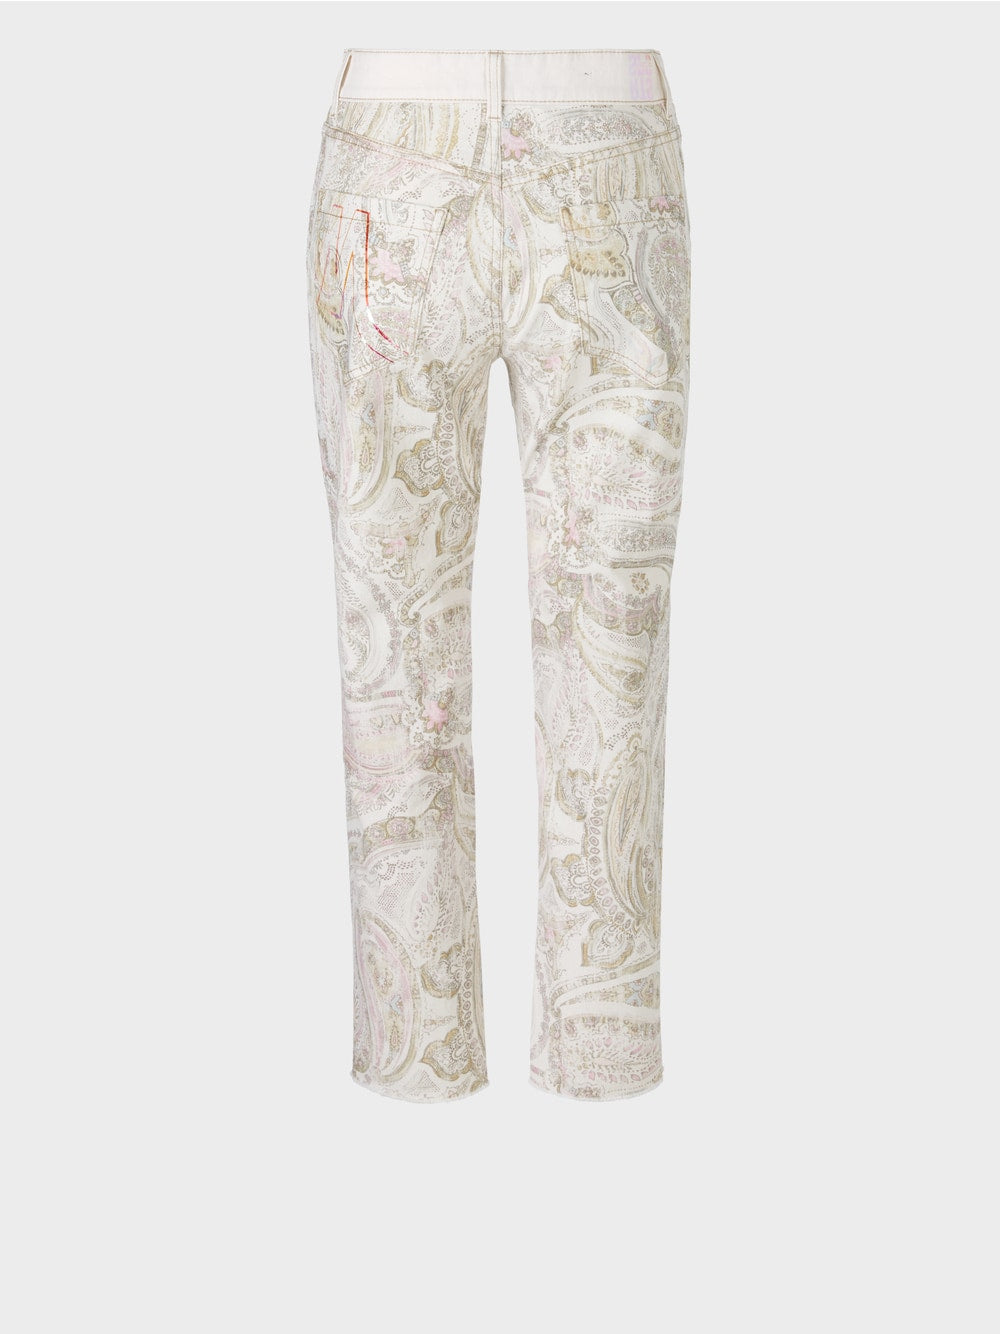 Marc Cain Paisley “Rethink Together” printed jeans